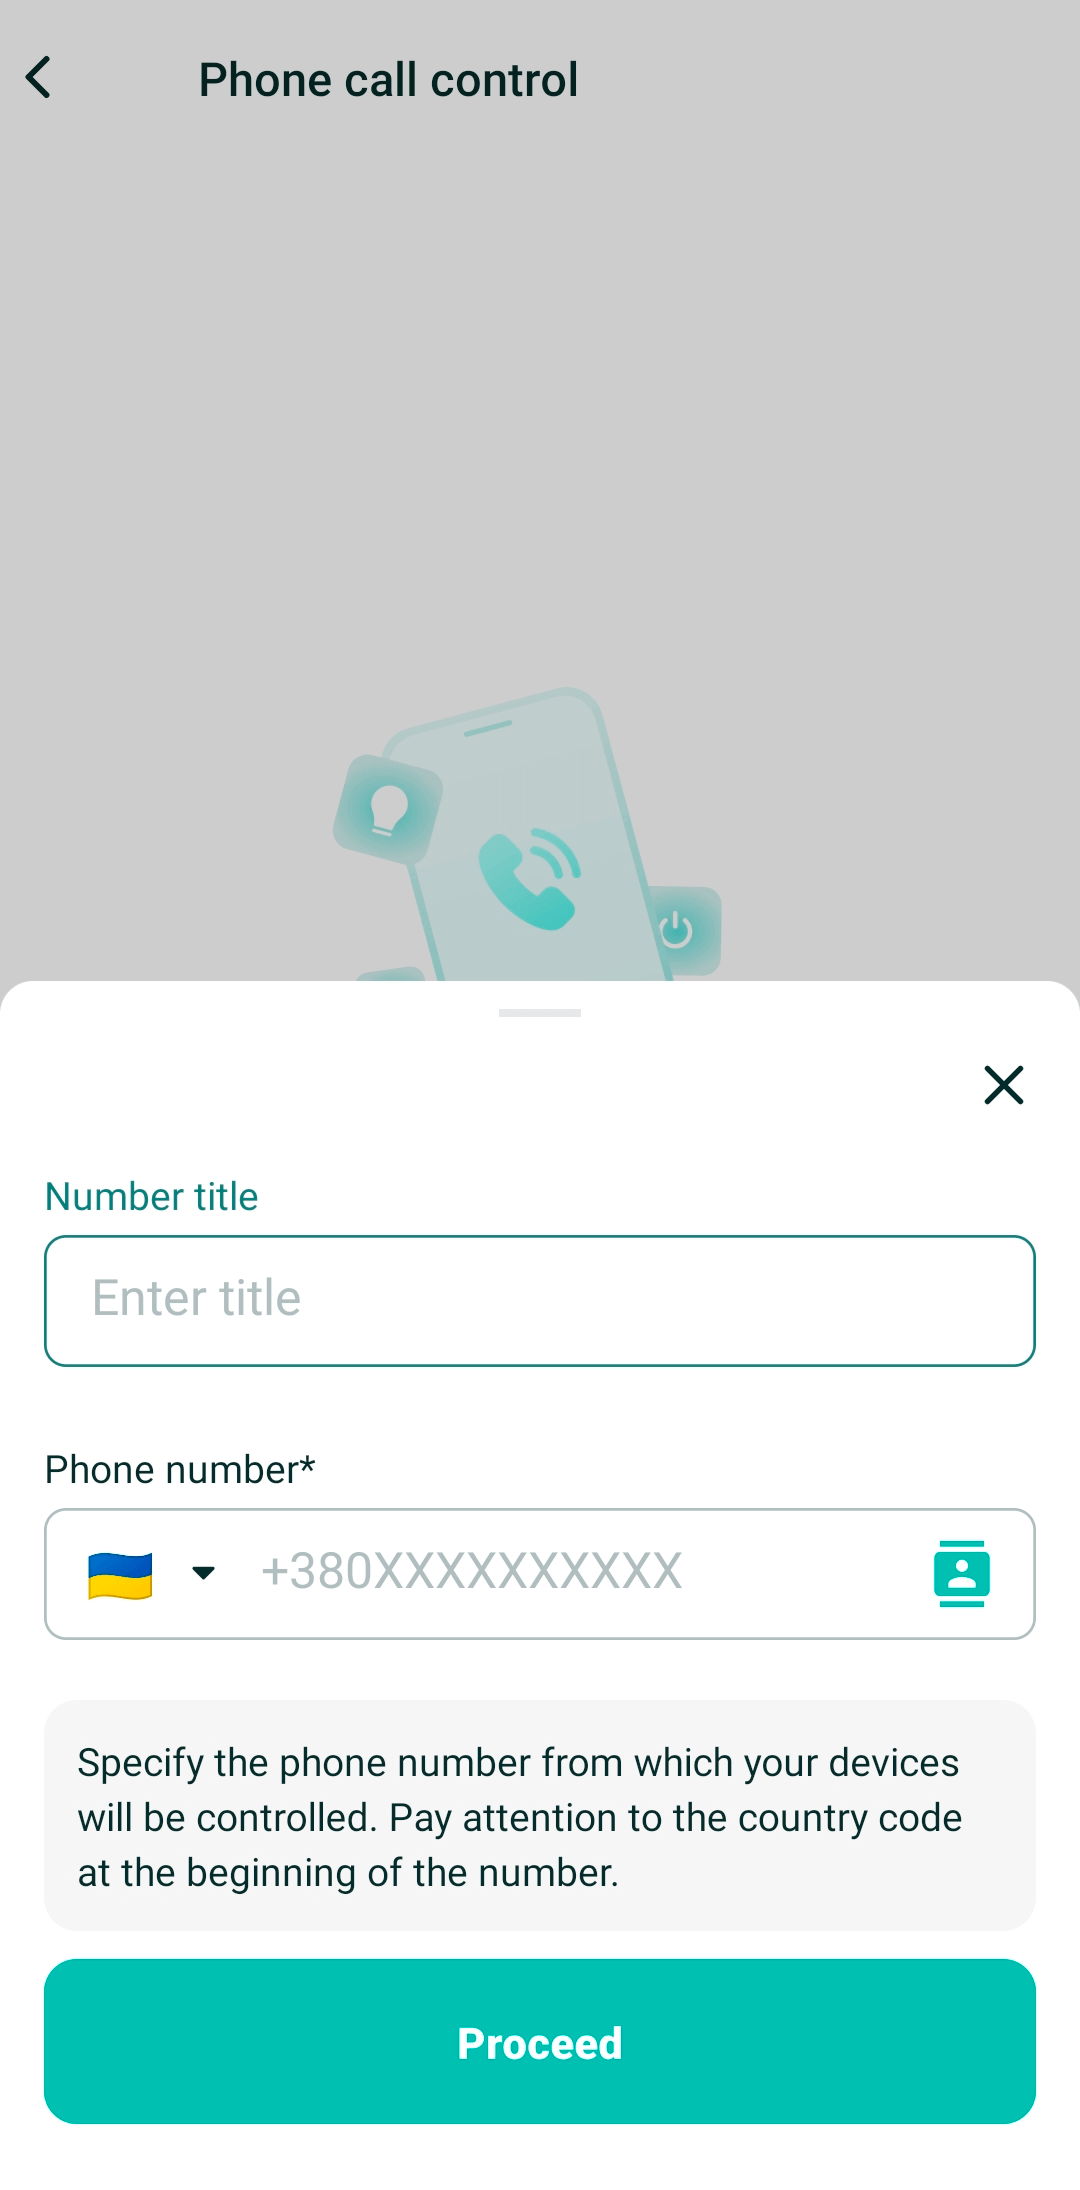 Auto country code substitution when configuring phone call control